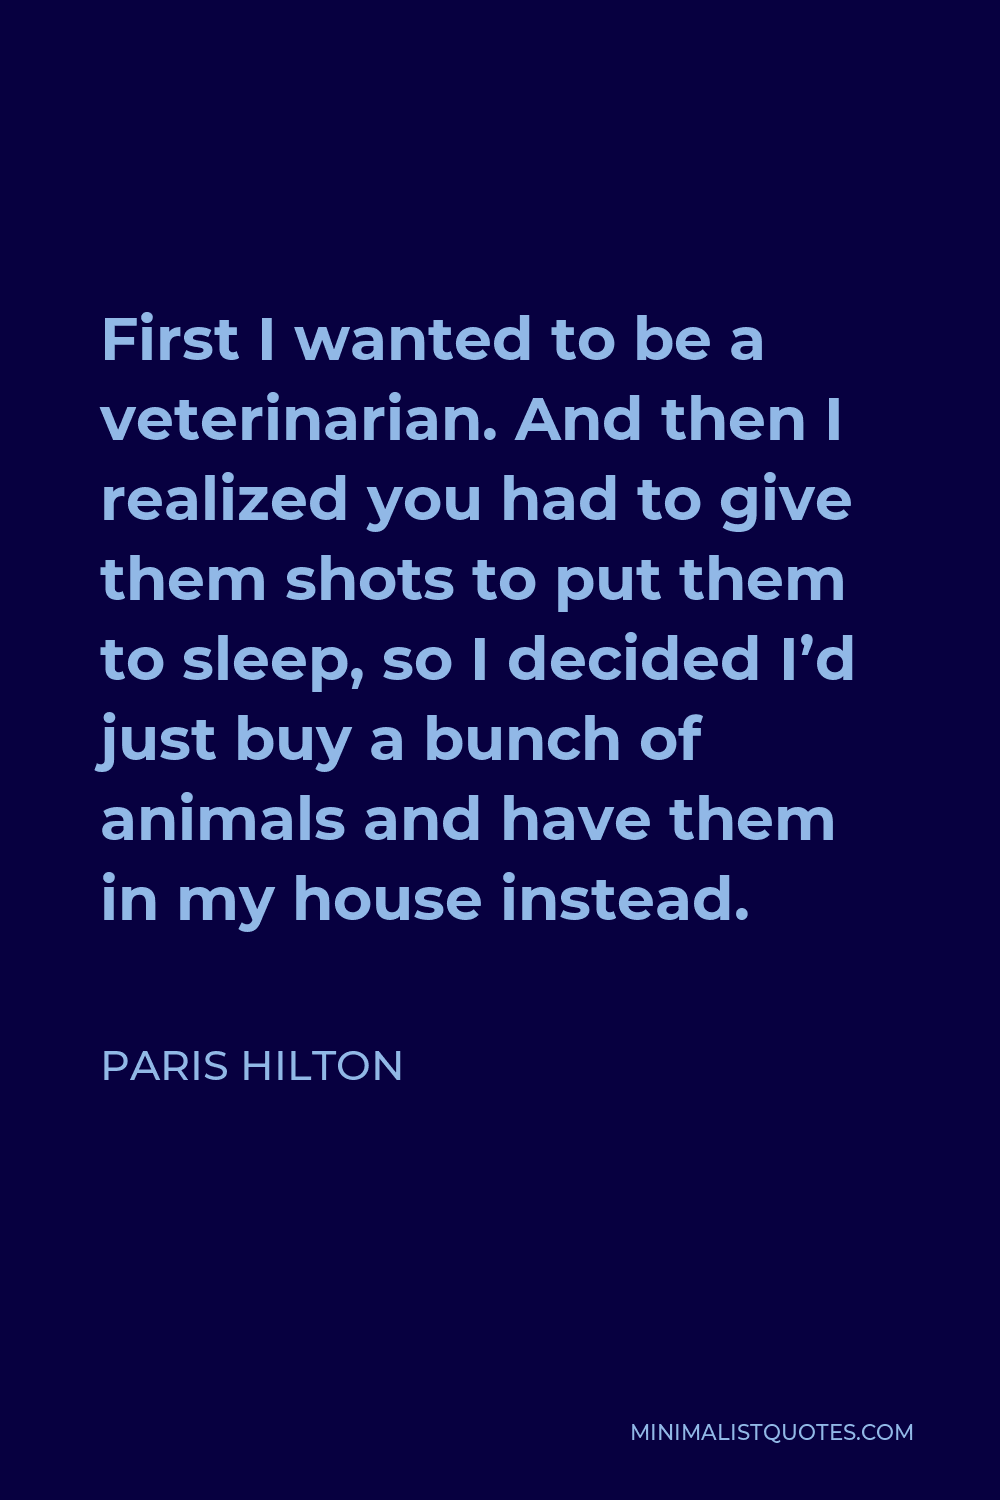 Paris Hilton Quote - First I wanted to be a veterinarian. And then I realized you had to give them shots to put them to sleep, so I decided I’d just buy a bunch of animals and have them in my house instead.